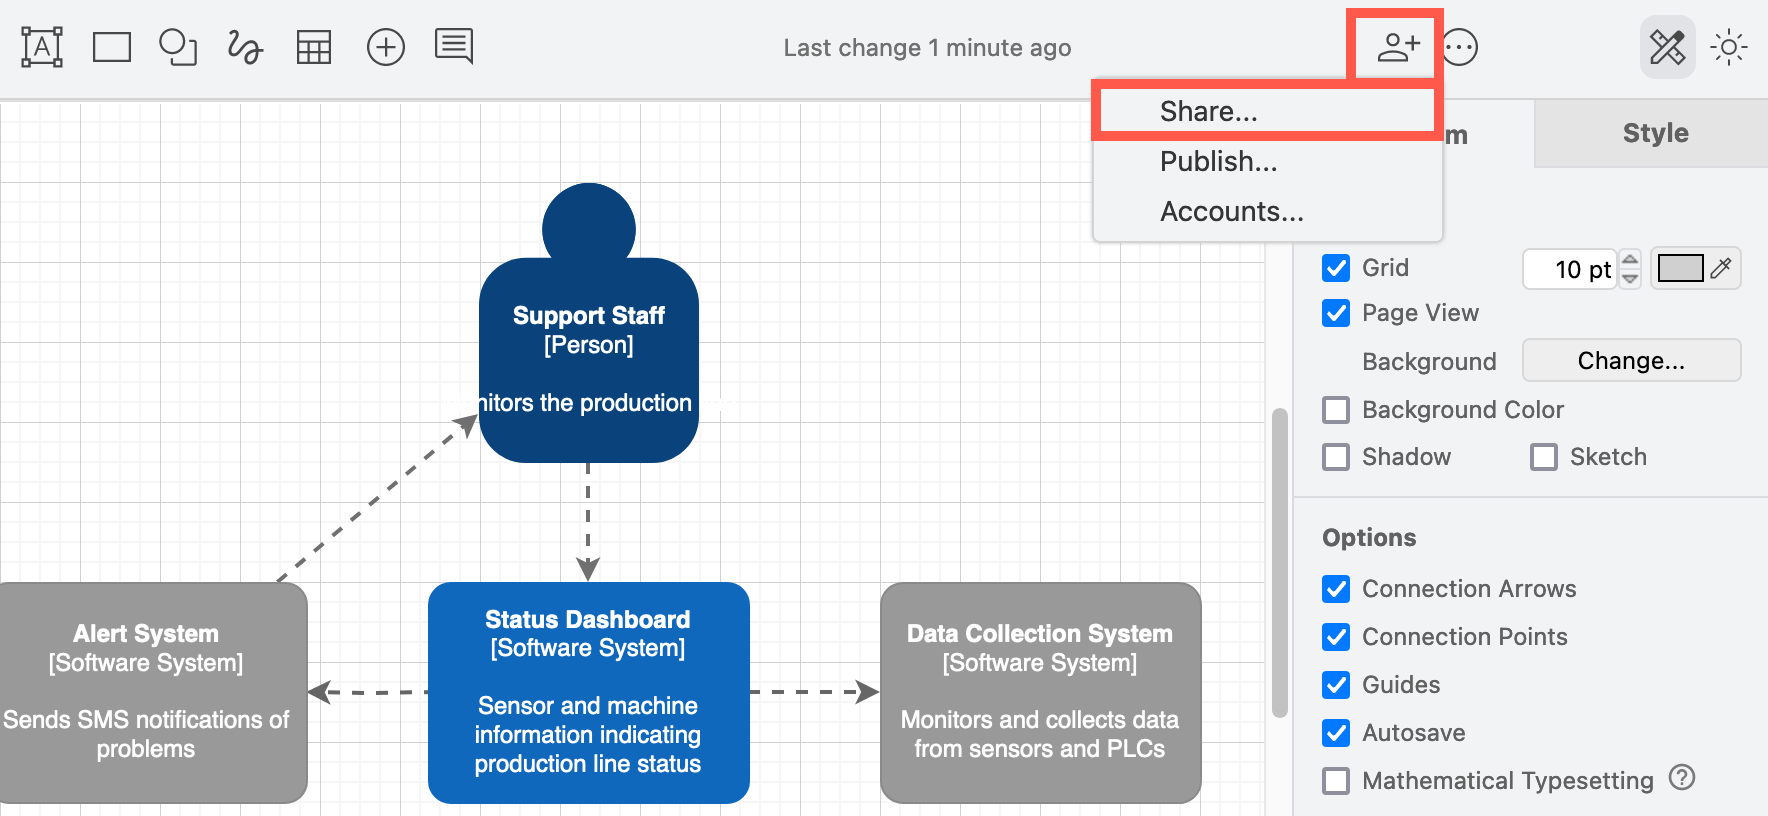 Share a diagram with colleagues from Google Drive or Microsoft OneDrive from the draw.io editor toolbar